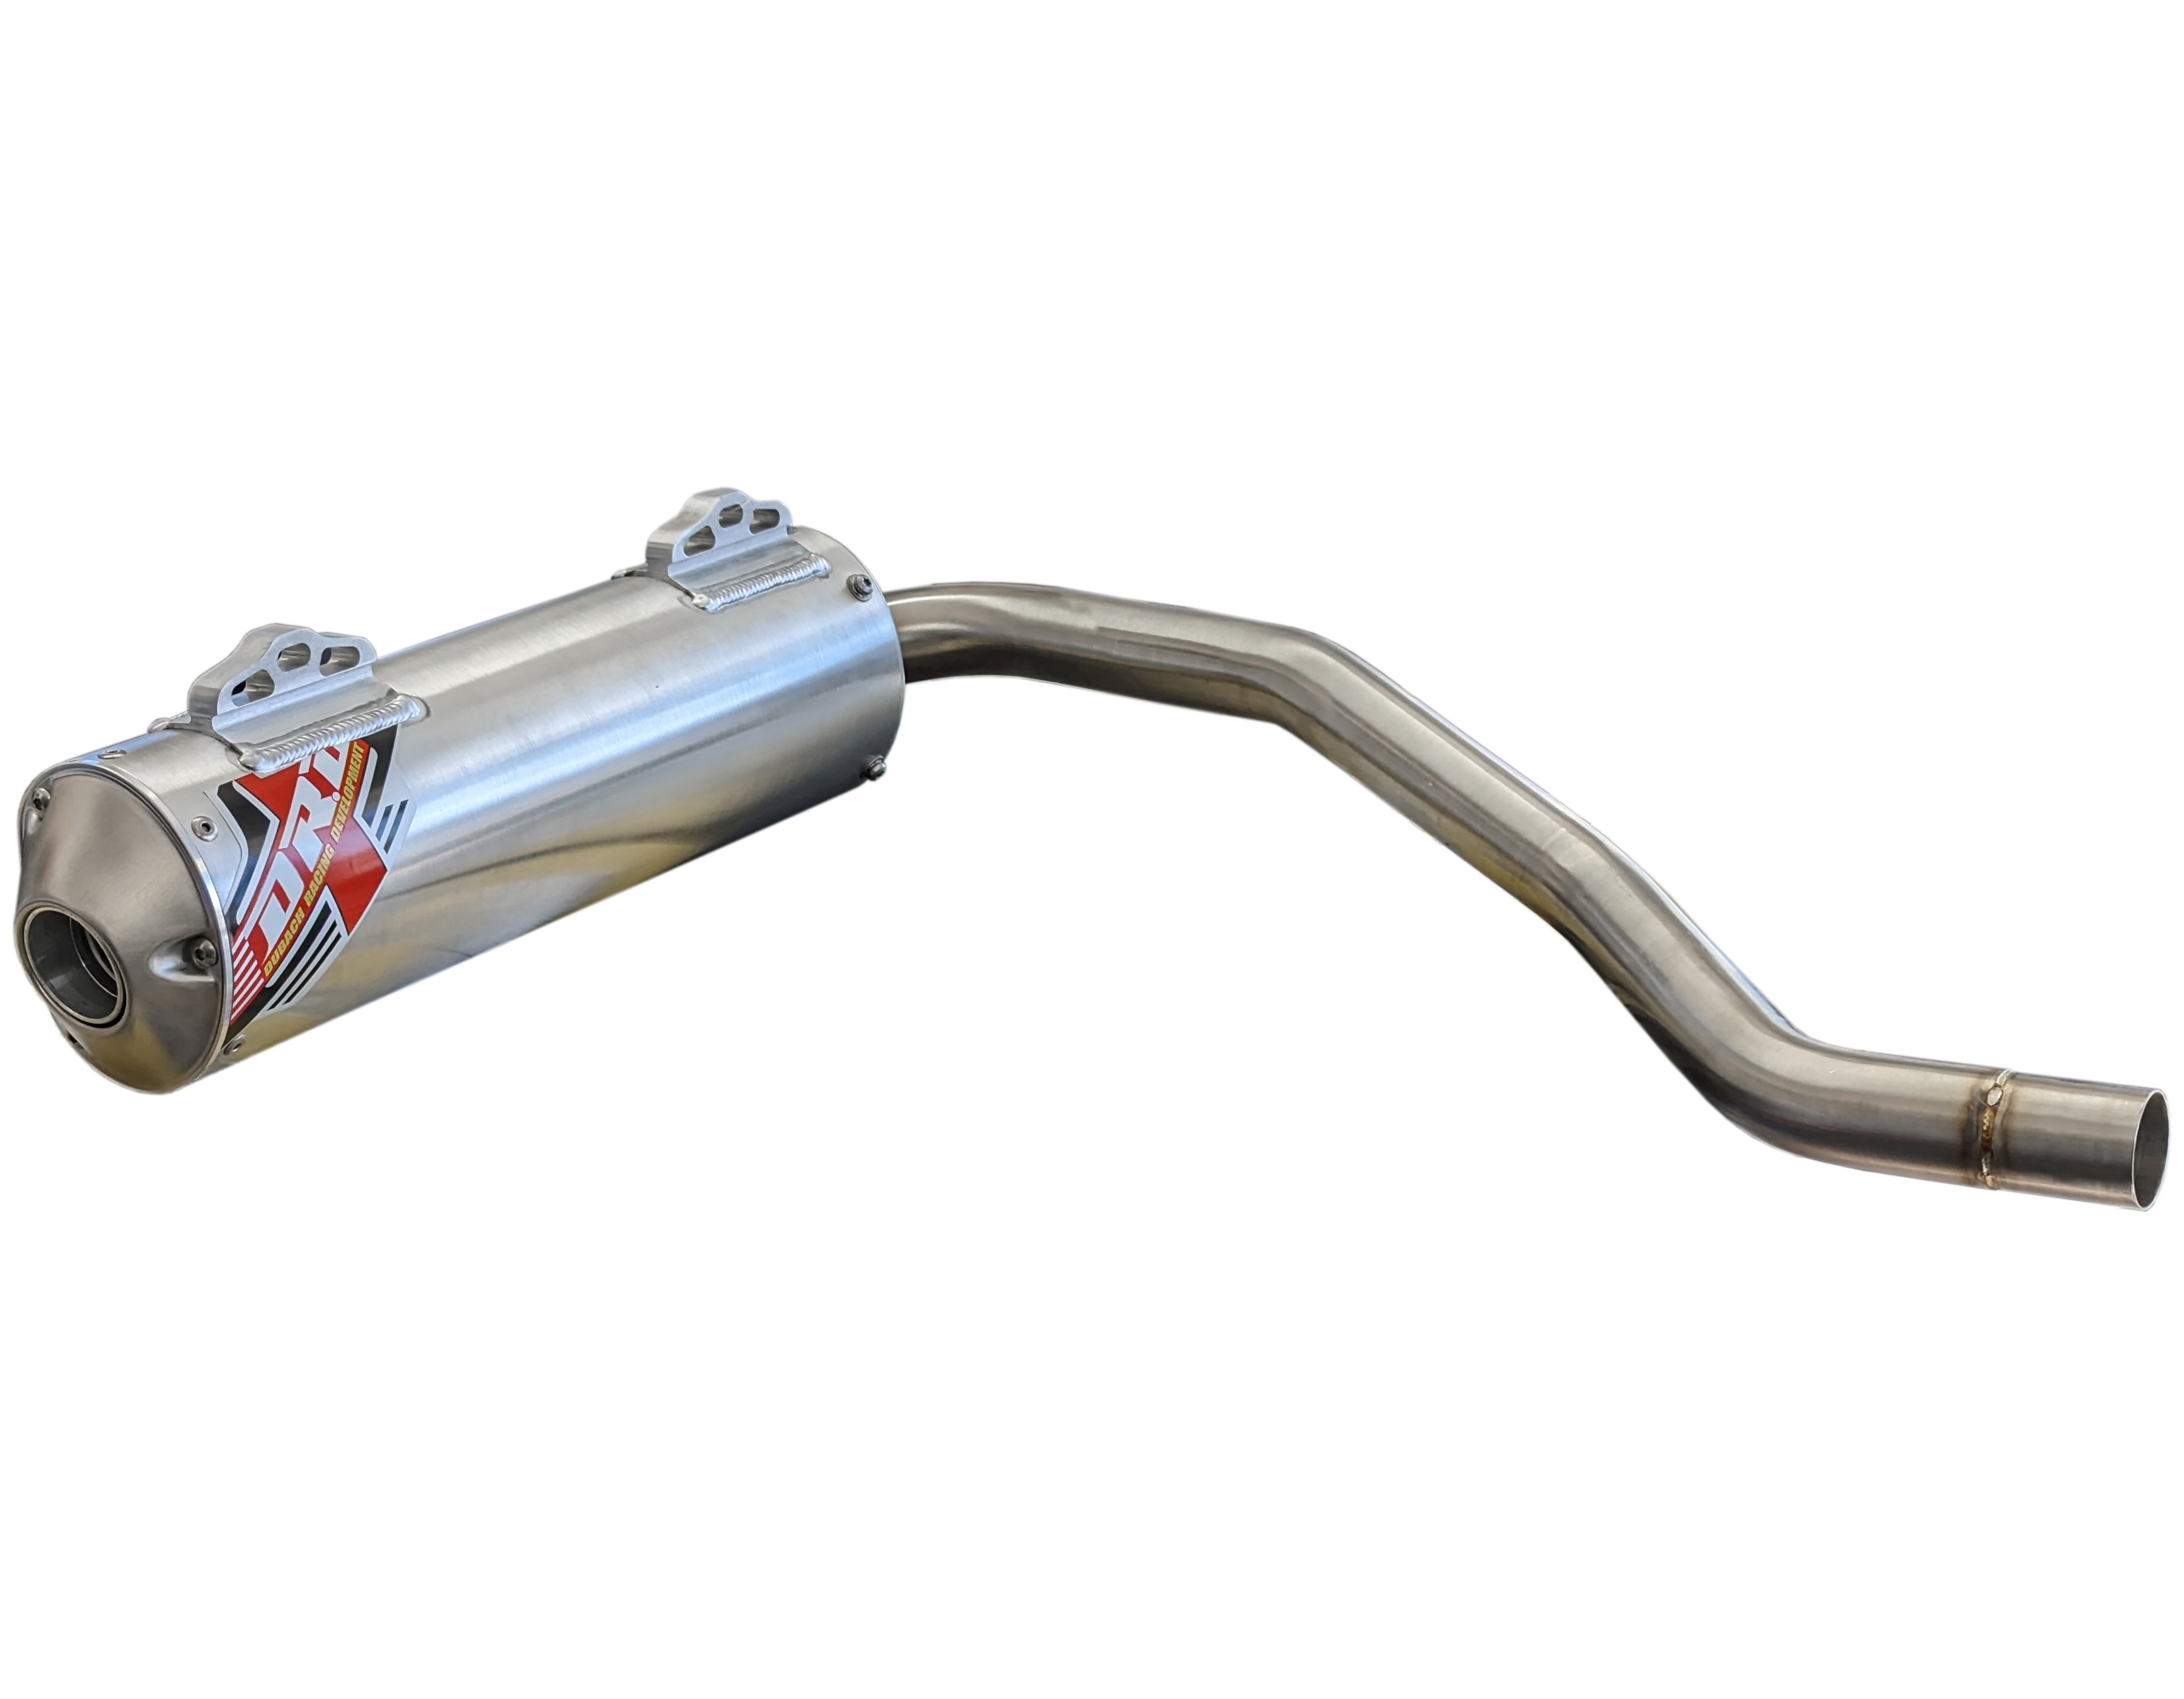 Stainless Steel & Aluminum Slip On Exhaust w/ Spark Arrestor - For 03-14 Honda Rincon 650 & 680 - Click Image to Close